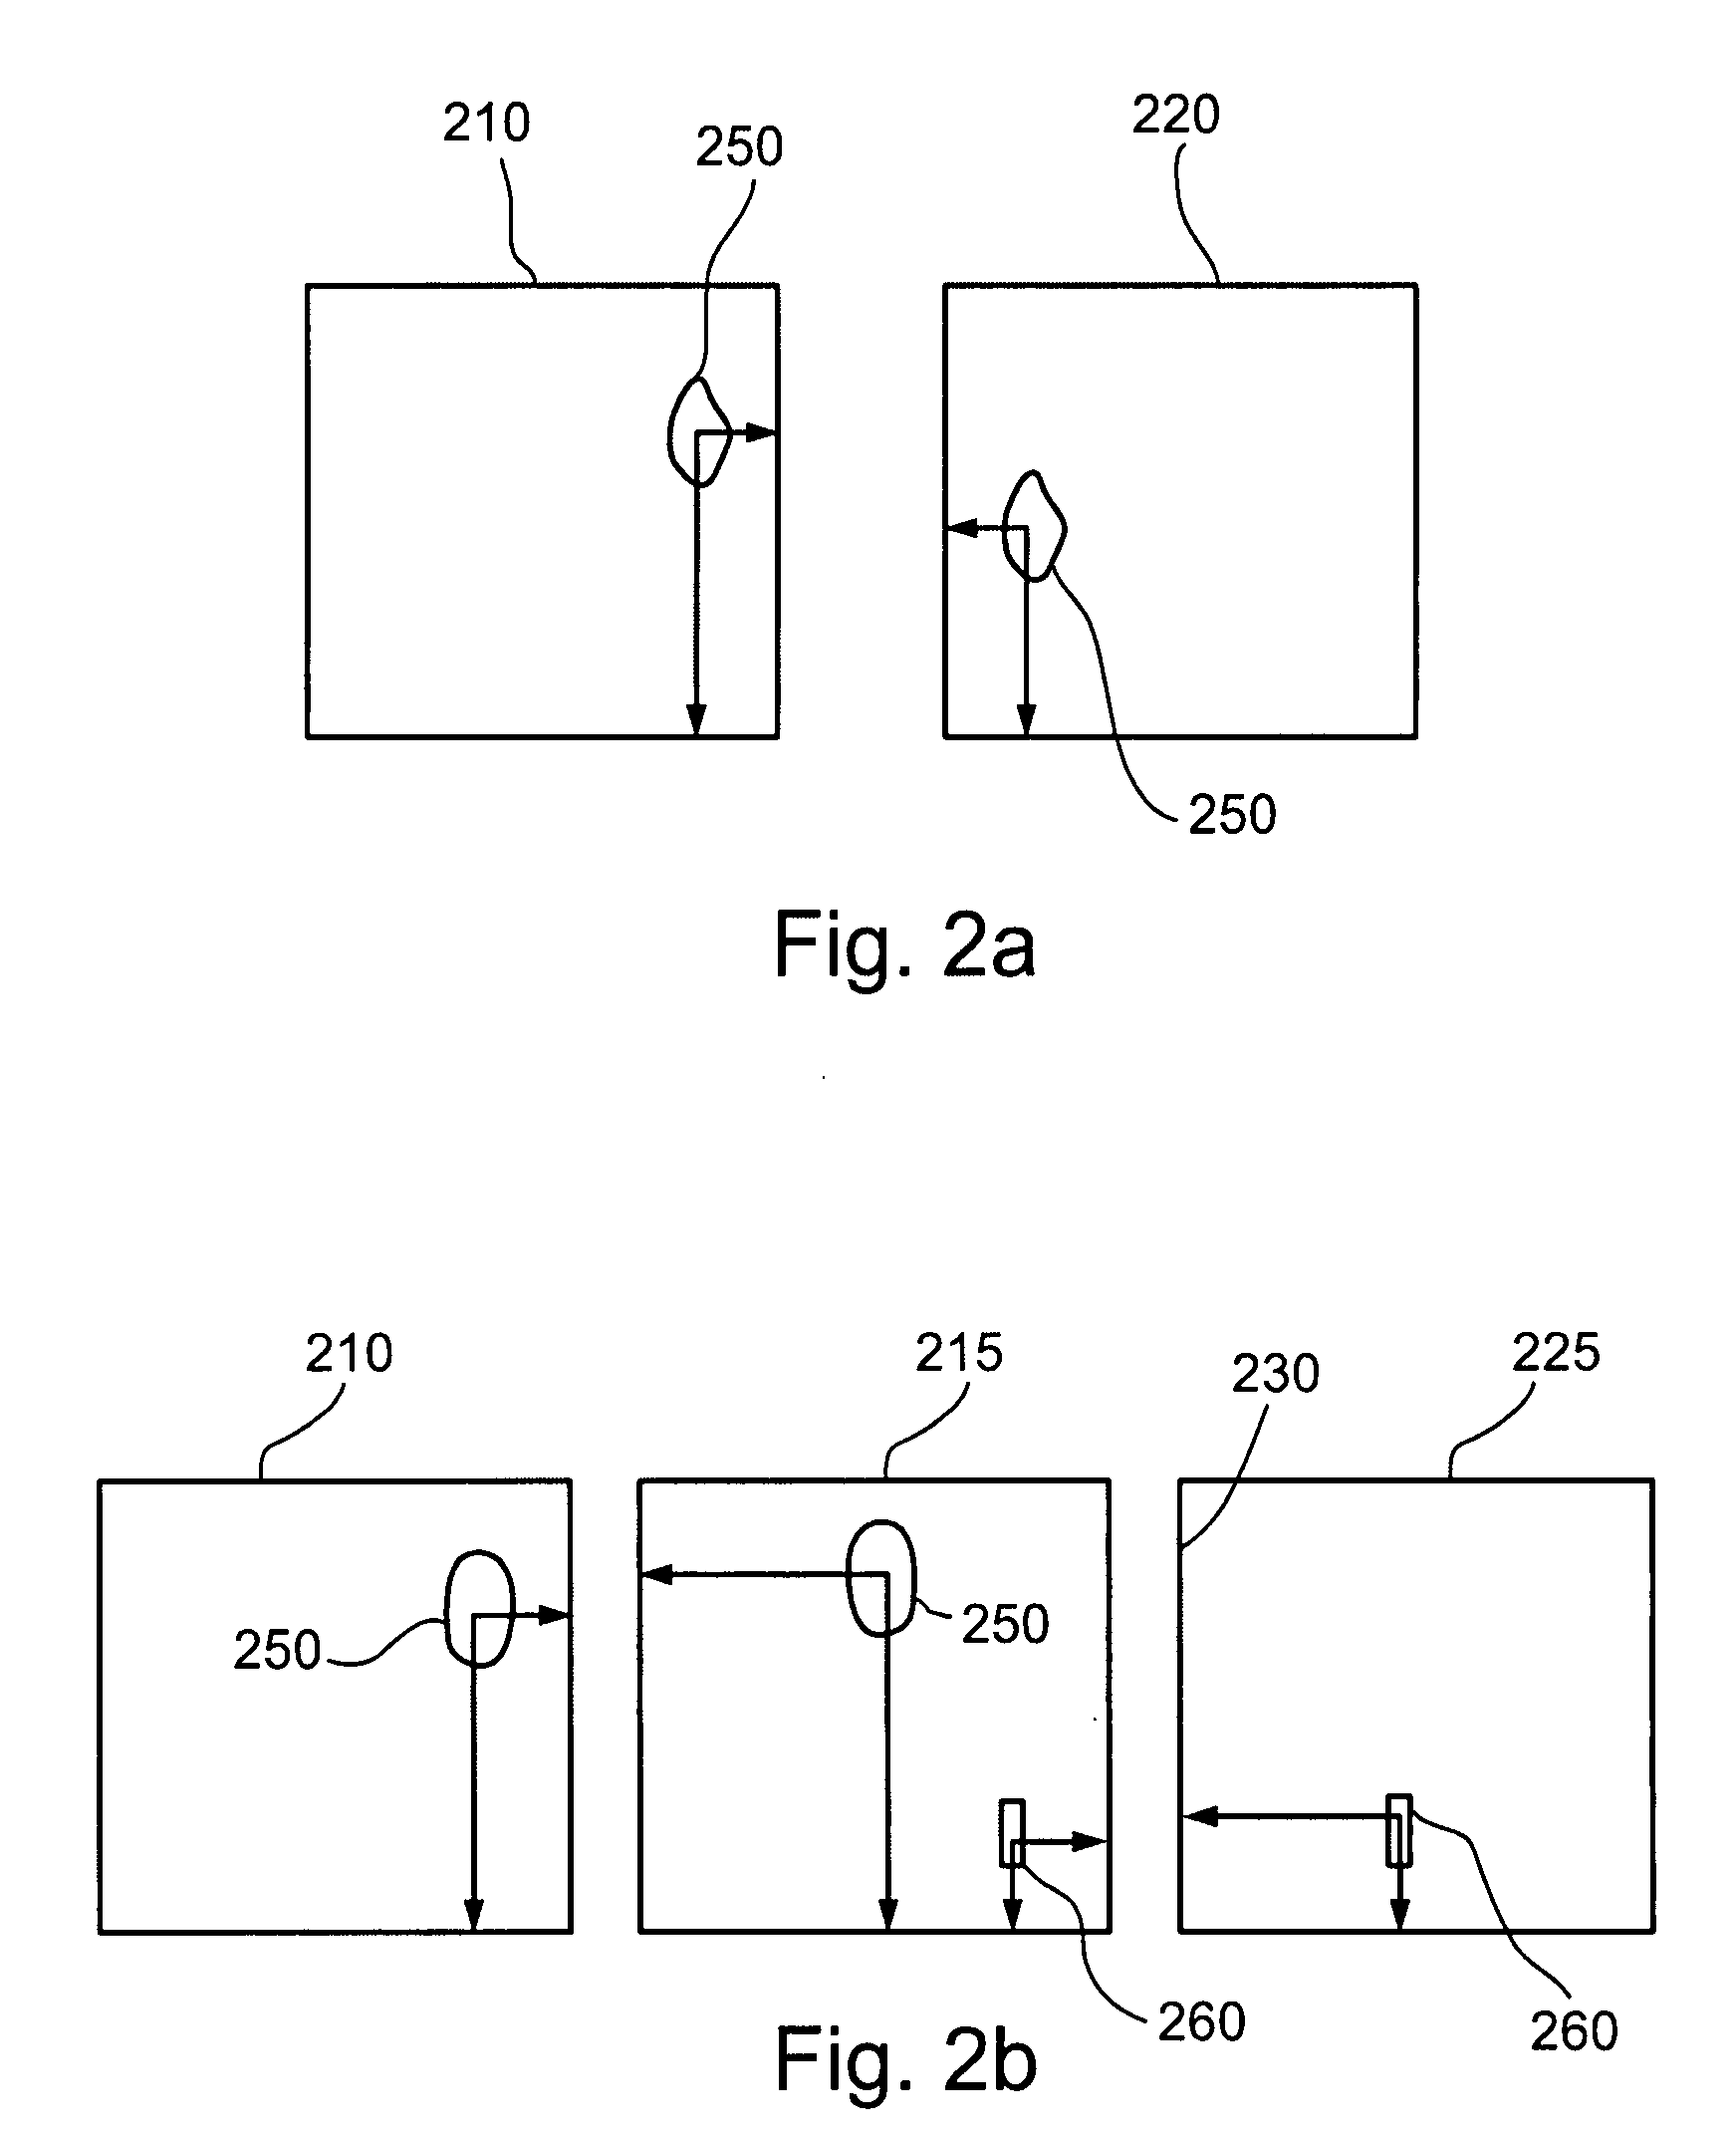 Method for constructing a composite image